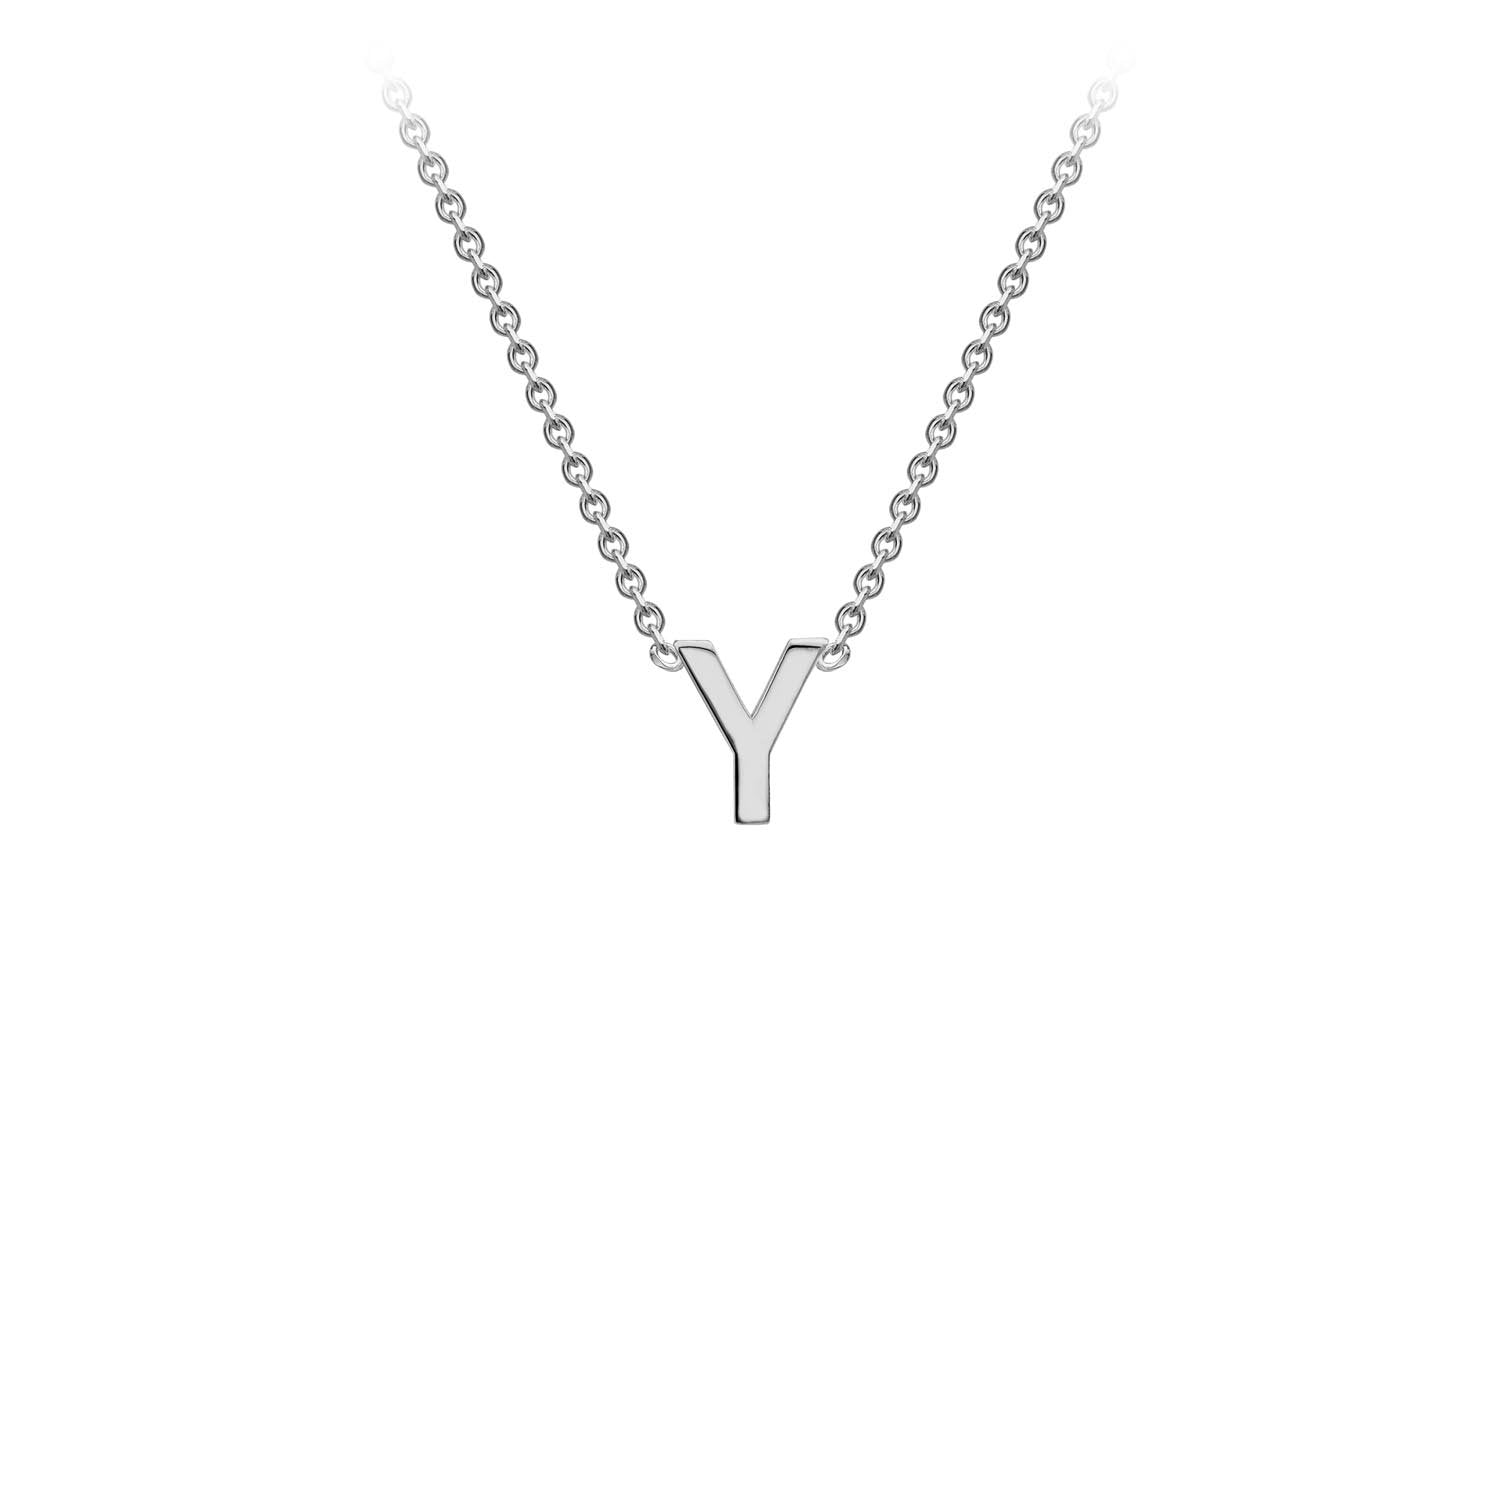 9ct White Gold 'Y' Initial Adjustable Letter Necklace 38/43cm